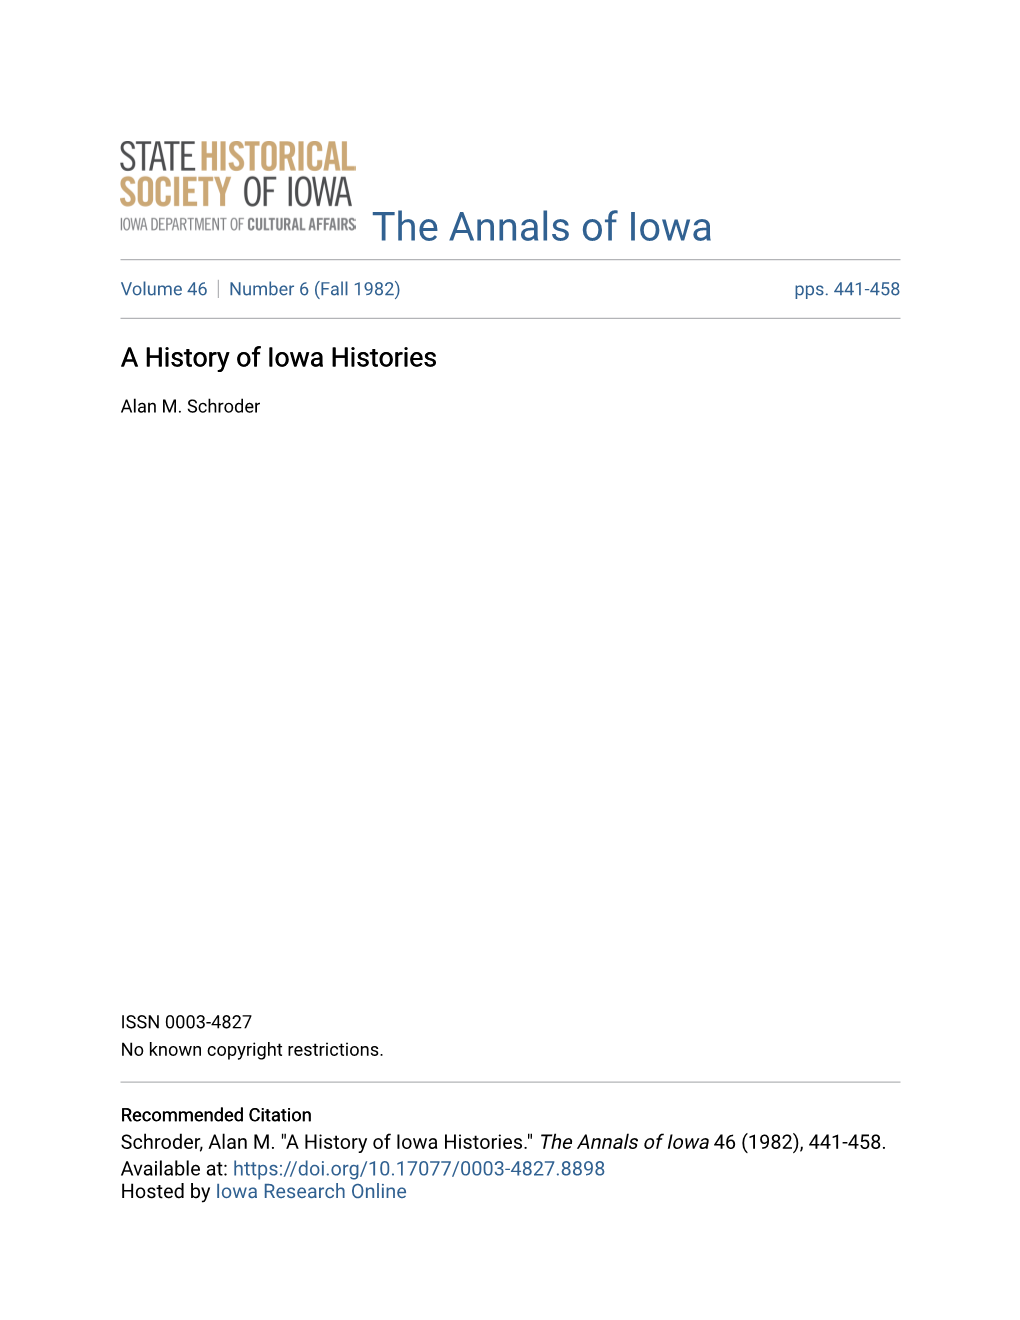 A History of Iowa Histories